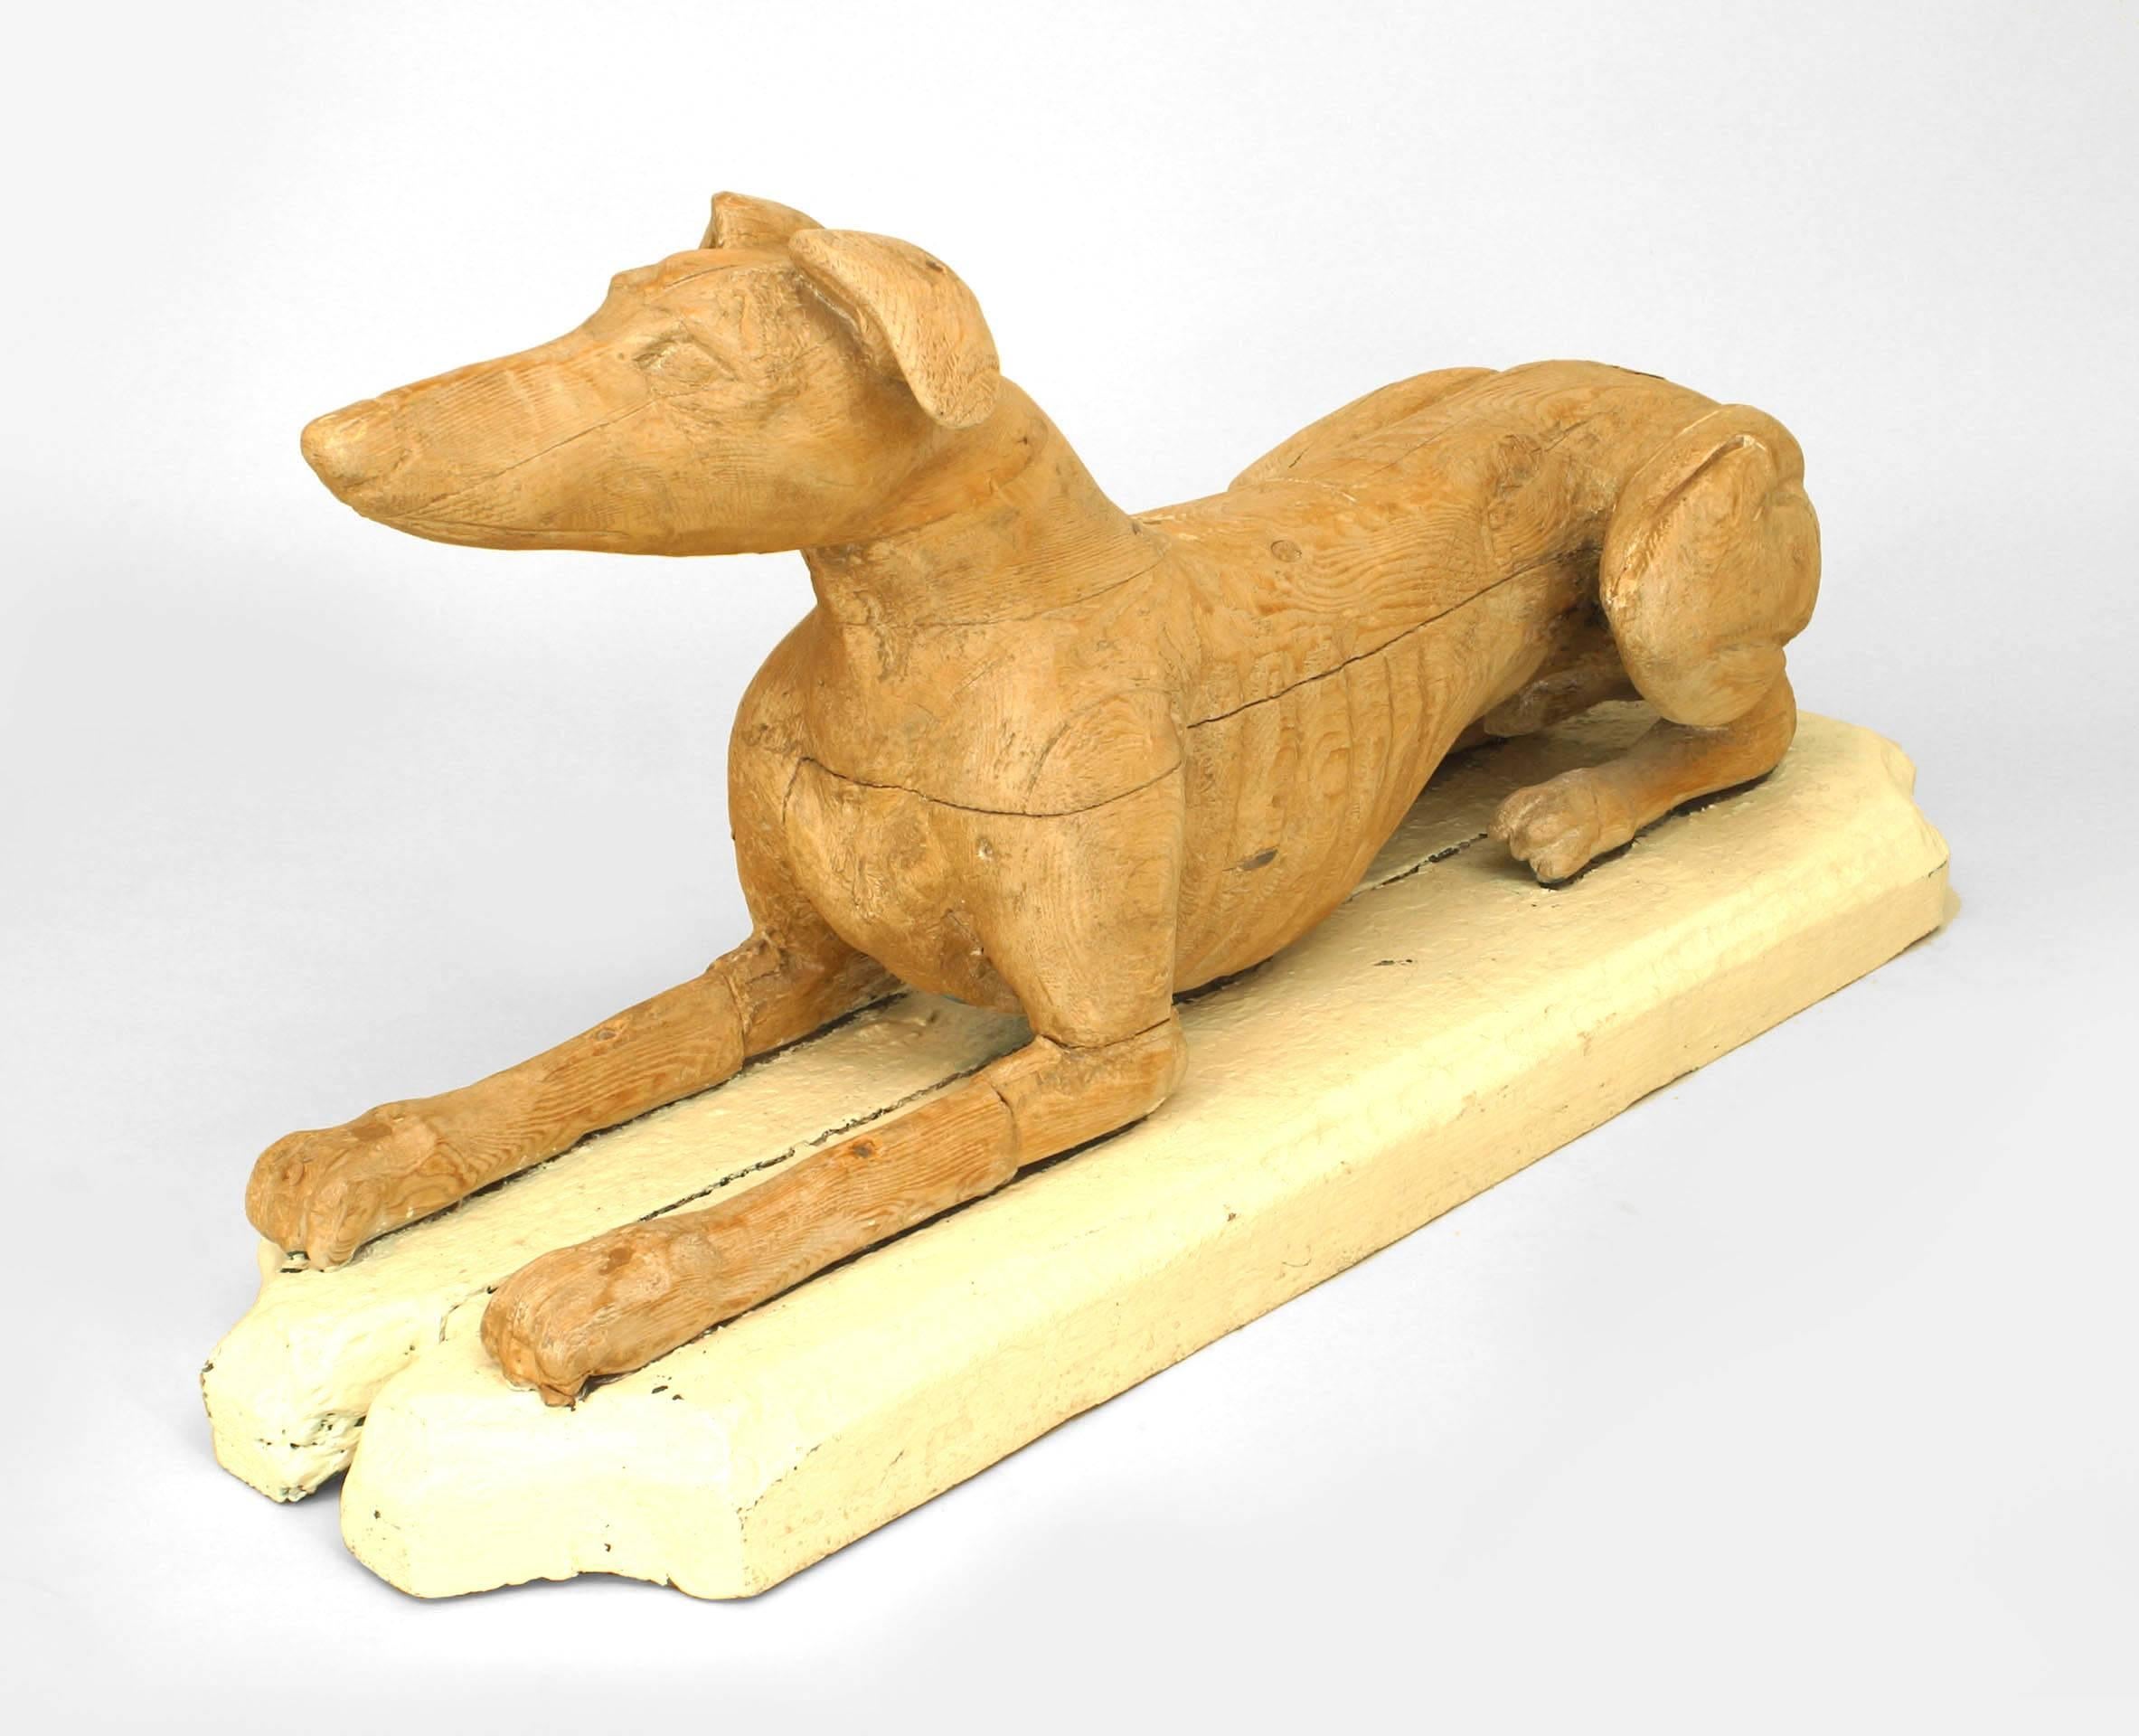 Pair of 19th Century English Life-Sized Dog Sculptures In Good Condition In New York, NY